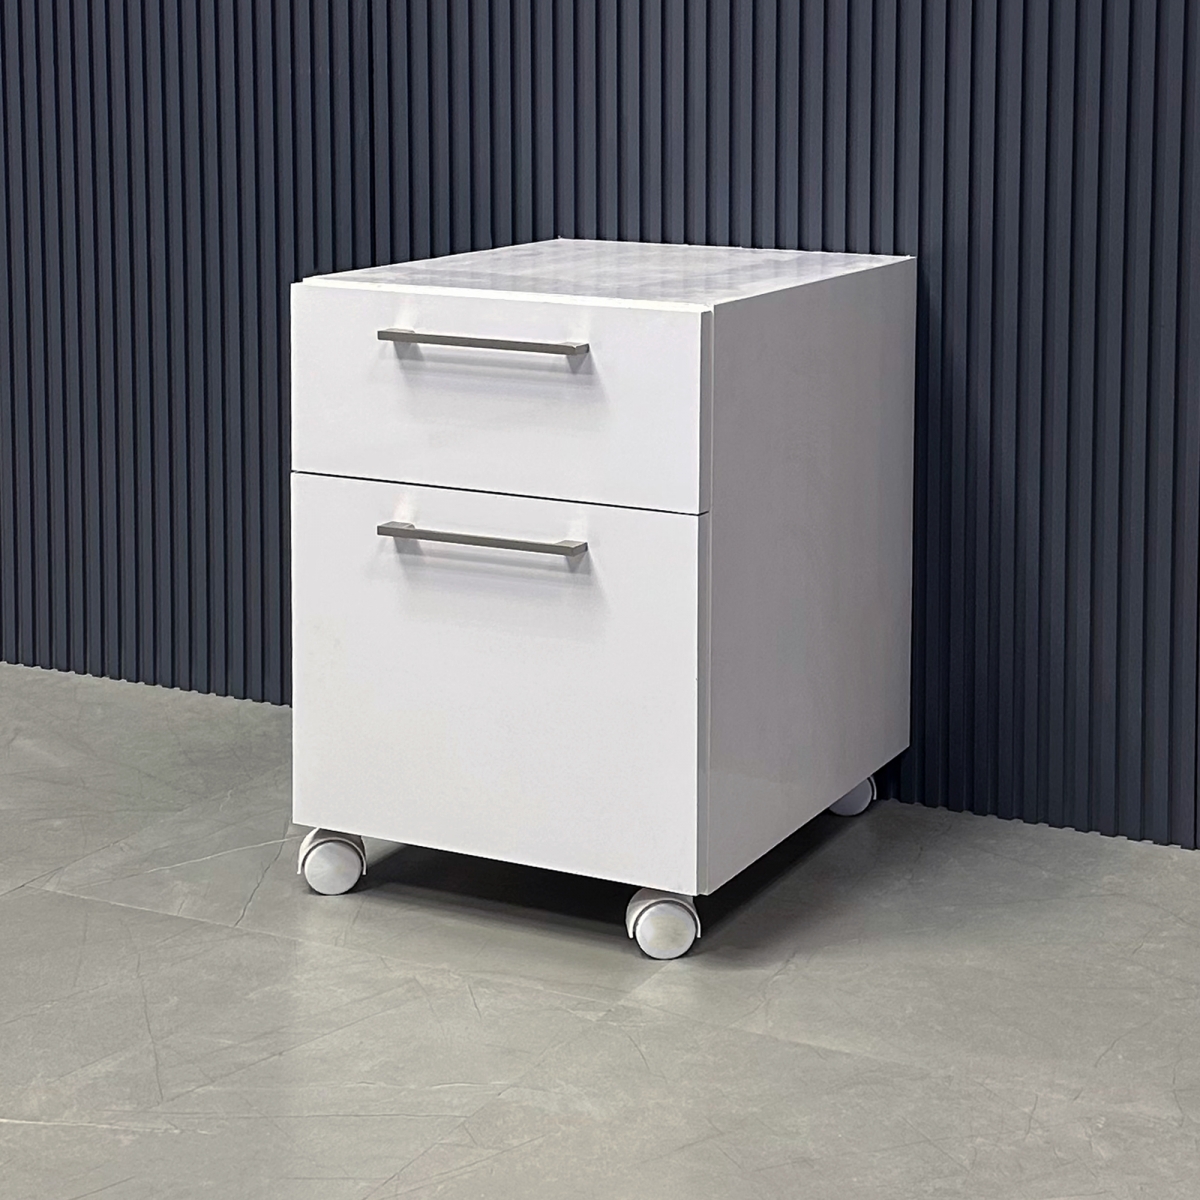 Naples Mobile Storage - 2 drawers - in White Gloss Laminate - 15 3/4